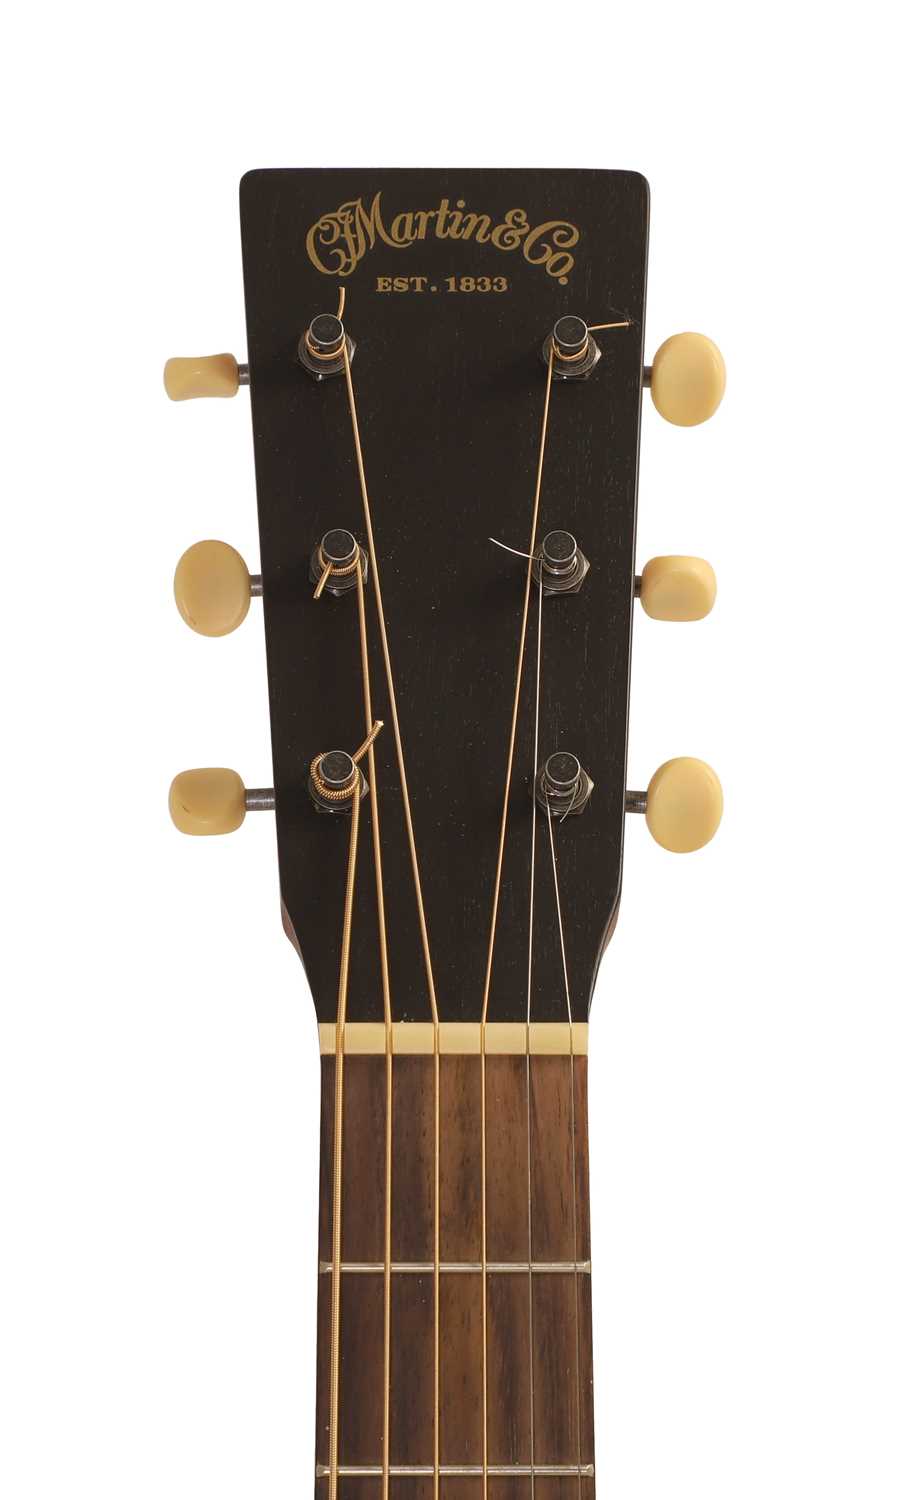 A 2009 Martin 00L-17 acoustic guitar, - Image 9 of 13